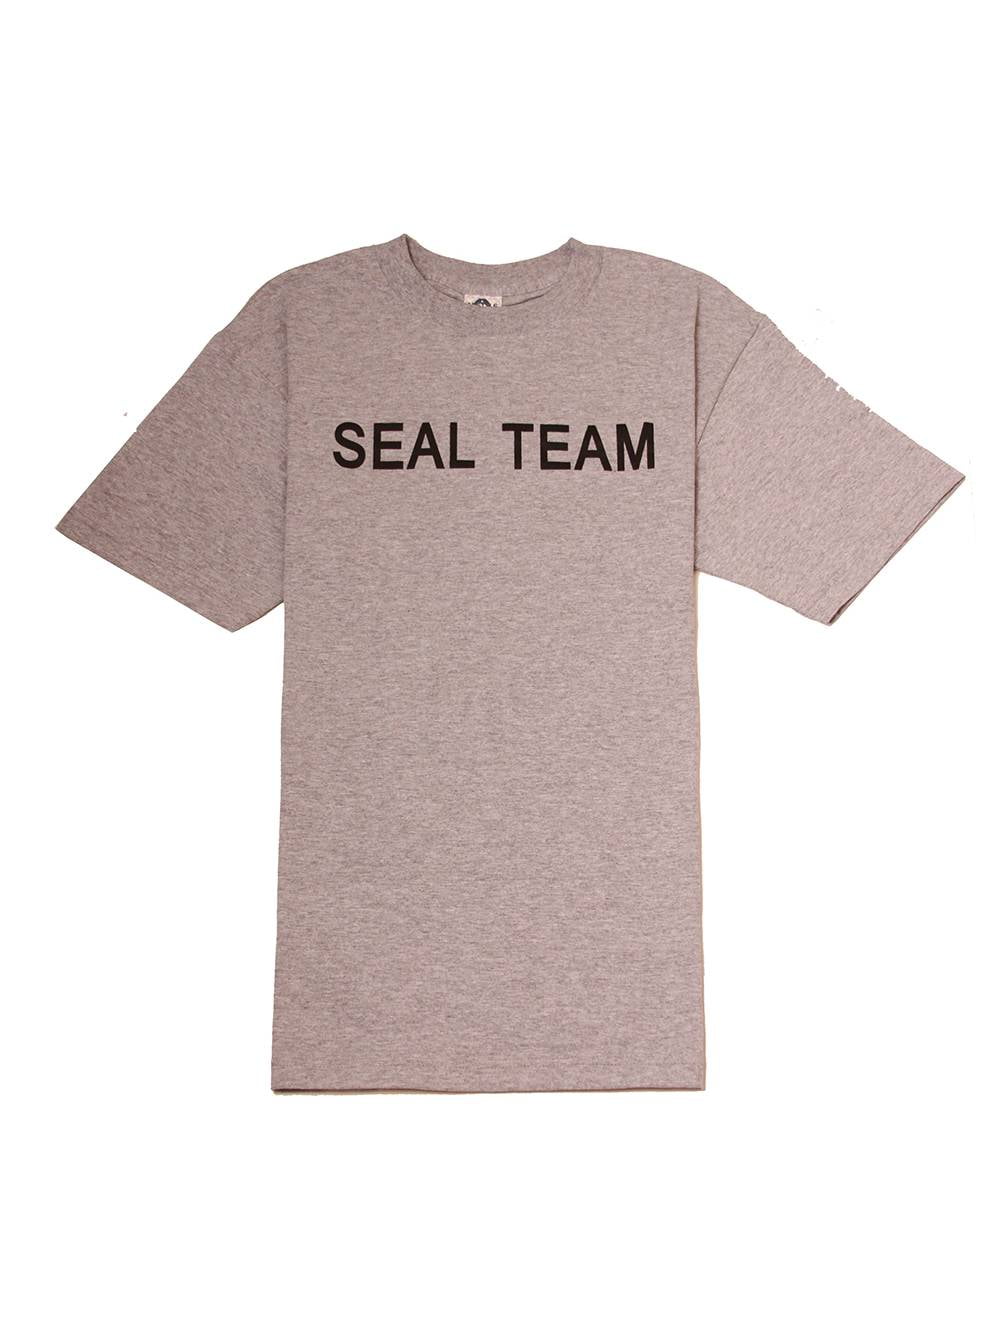 Navy Seal Team 6 Embroidered T-Shirt S to 6XL U.S LT-4XLT Navy Seals New 